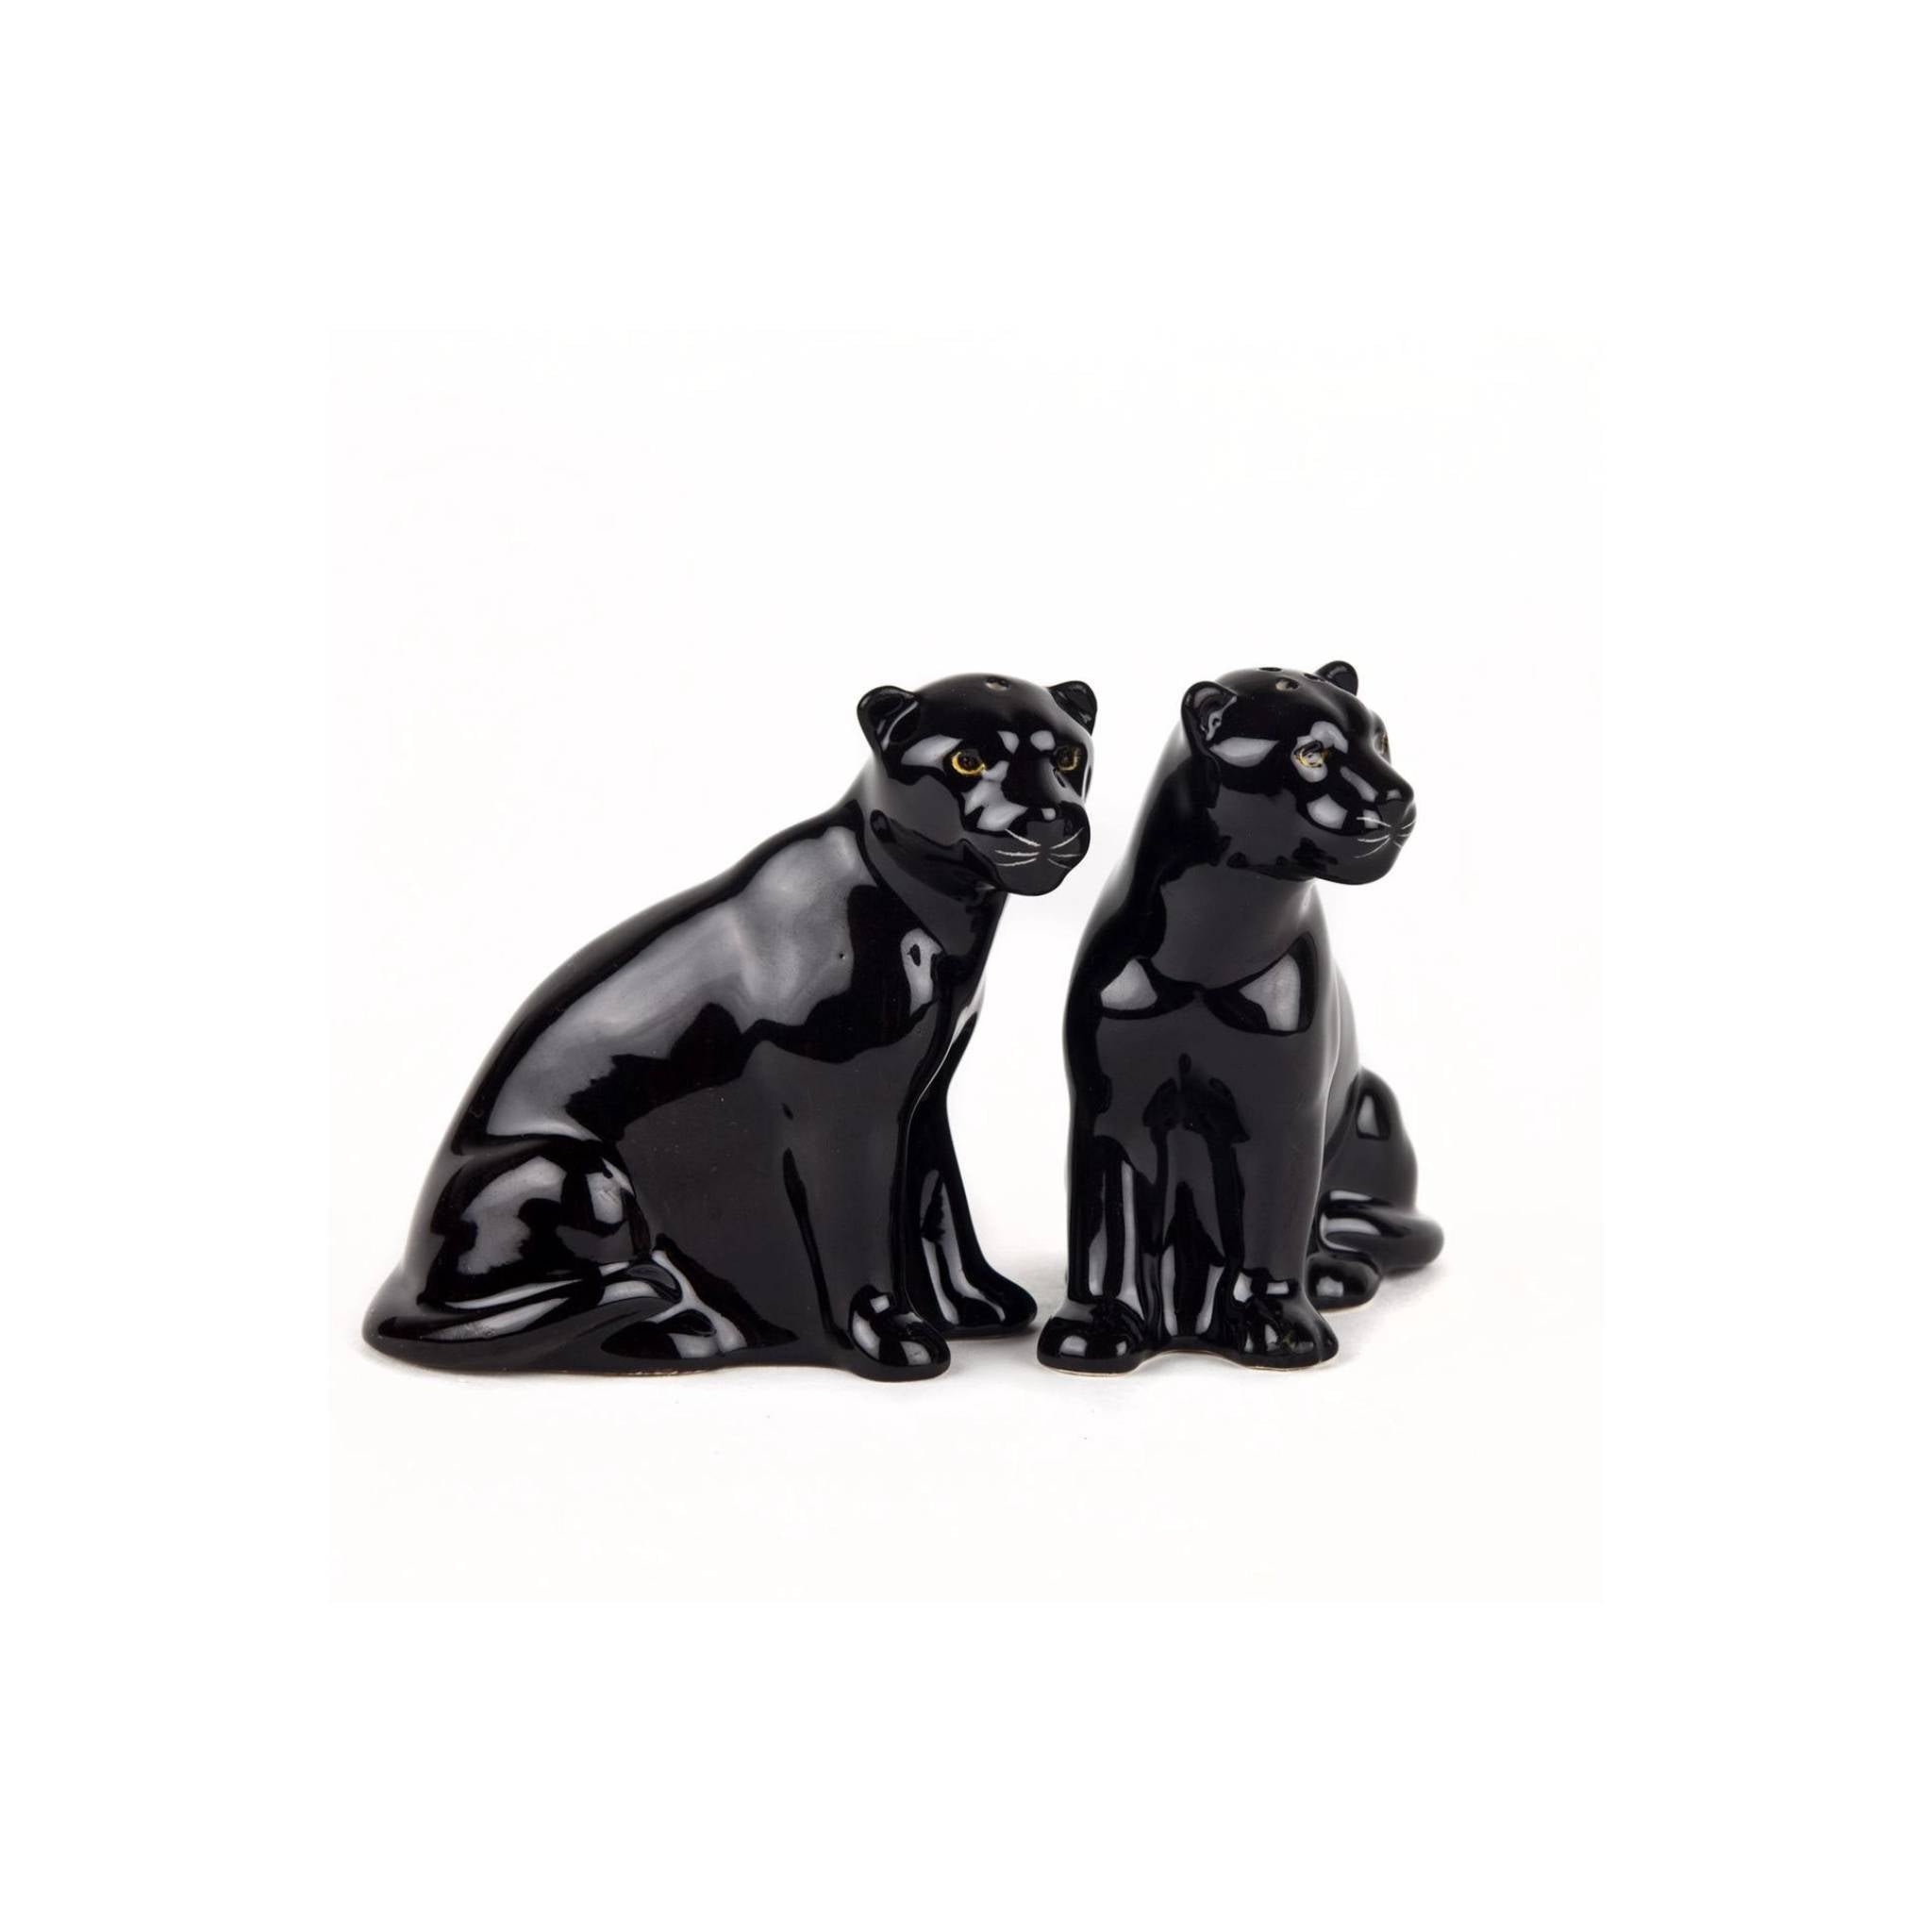 Panther Salt and Pepper Shaker